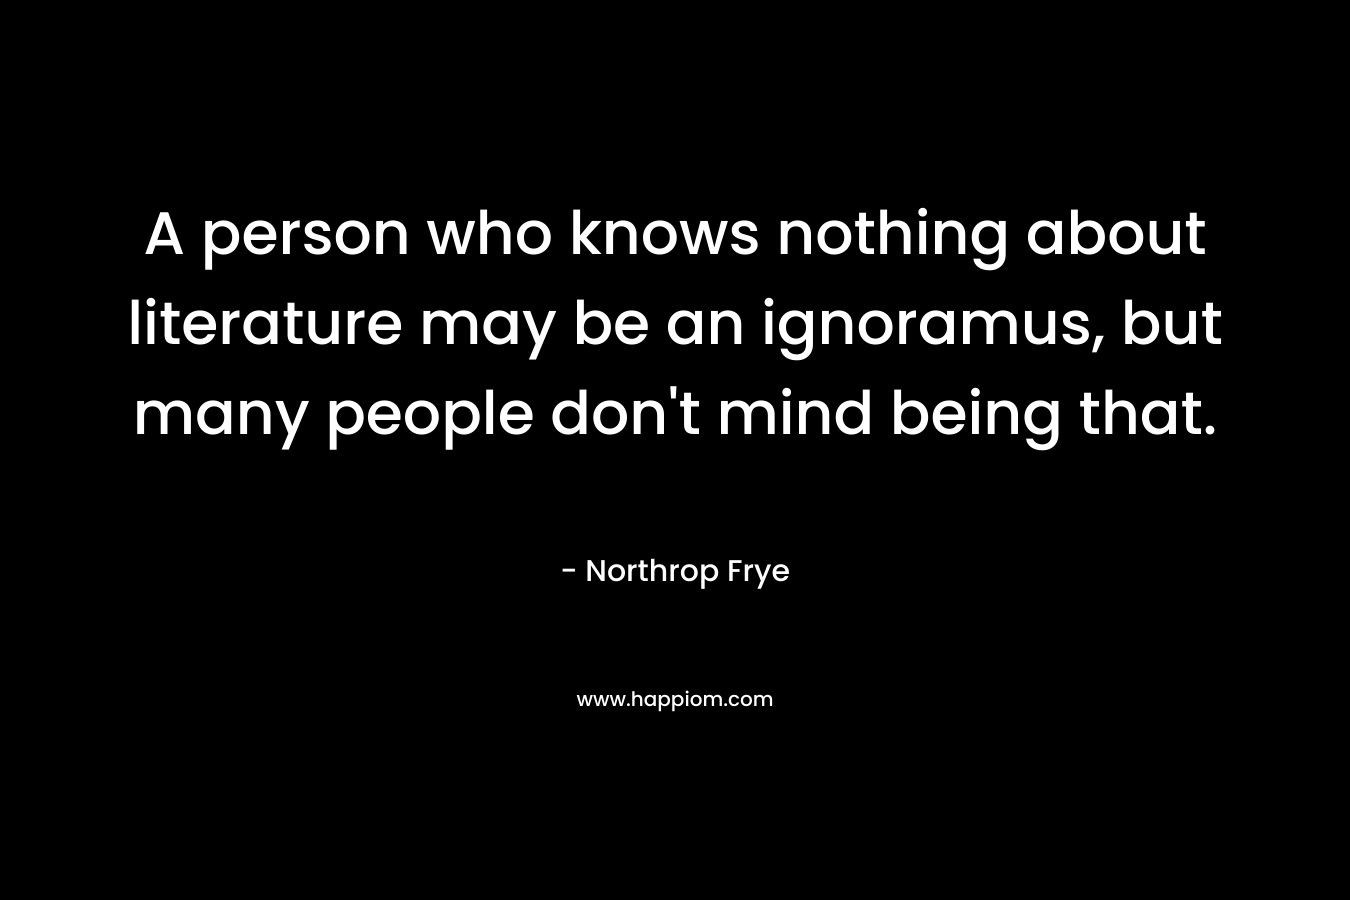 A person who knows nothing about literature may be an ignoramus, but many people don’t mind being that. – Northrop Frye